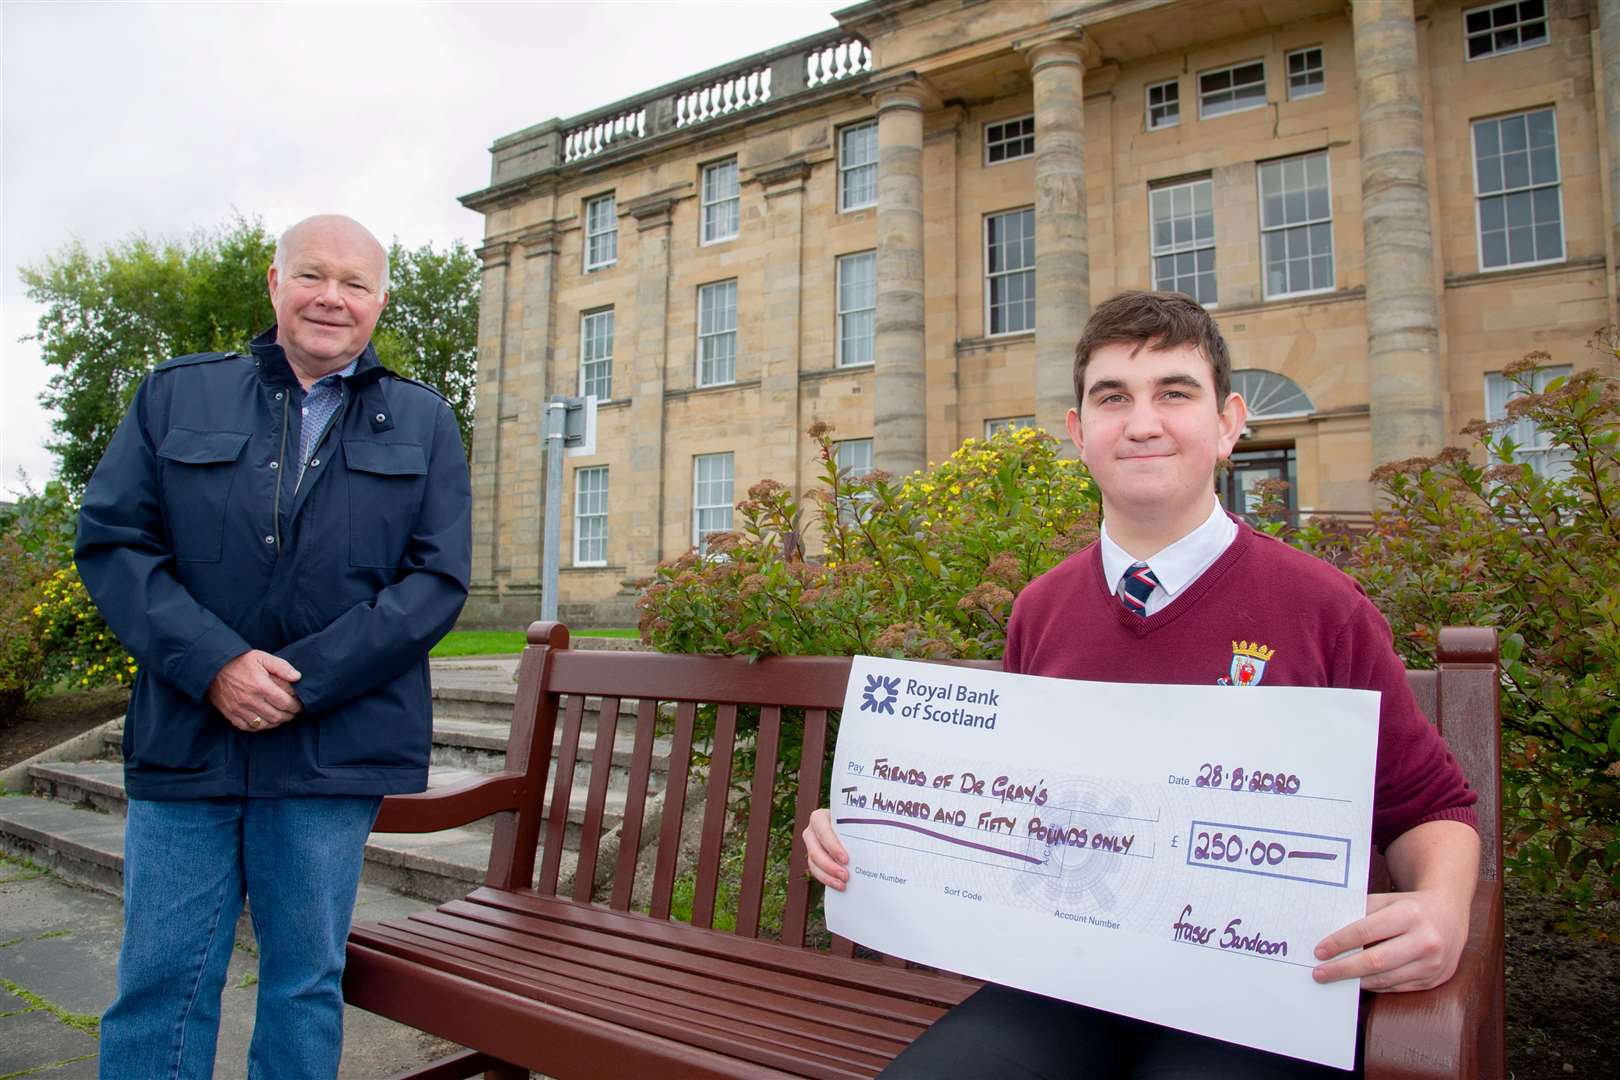 Fraser Sandison, a sixth-year pupil at Elgin Academy, hands over a cheque to Friends of Dr Gray's committee member Dr Ken Brown outside the Elgin hospital.